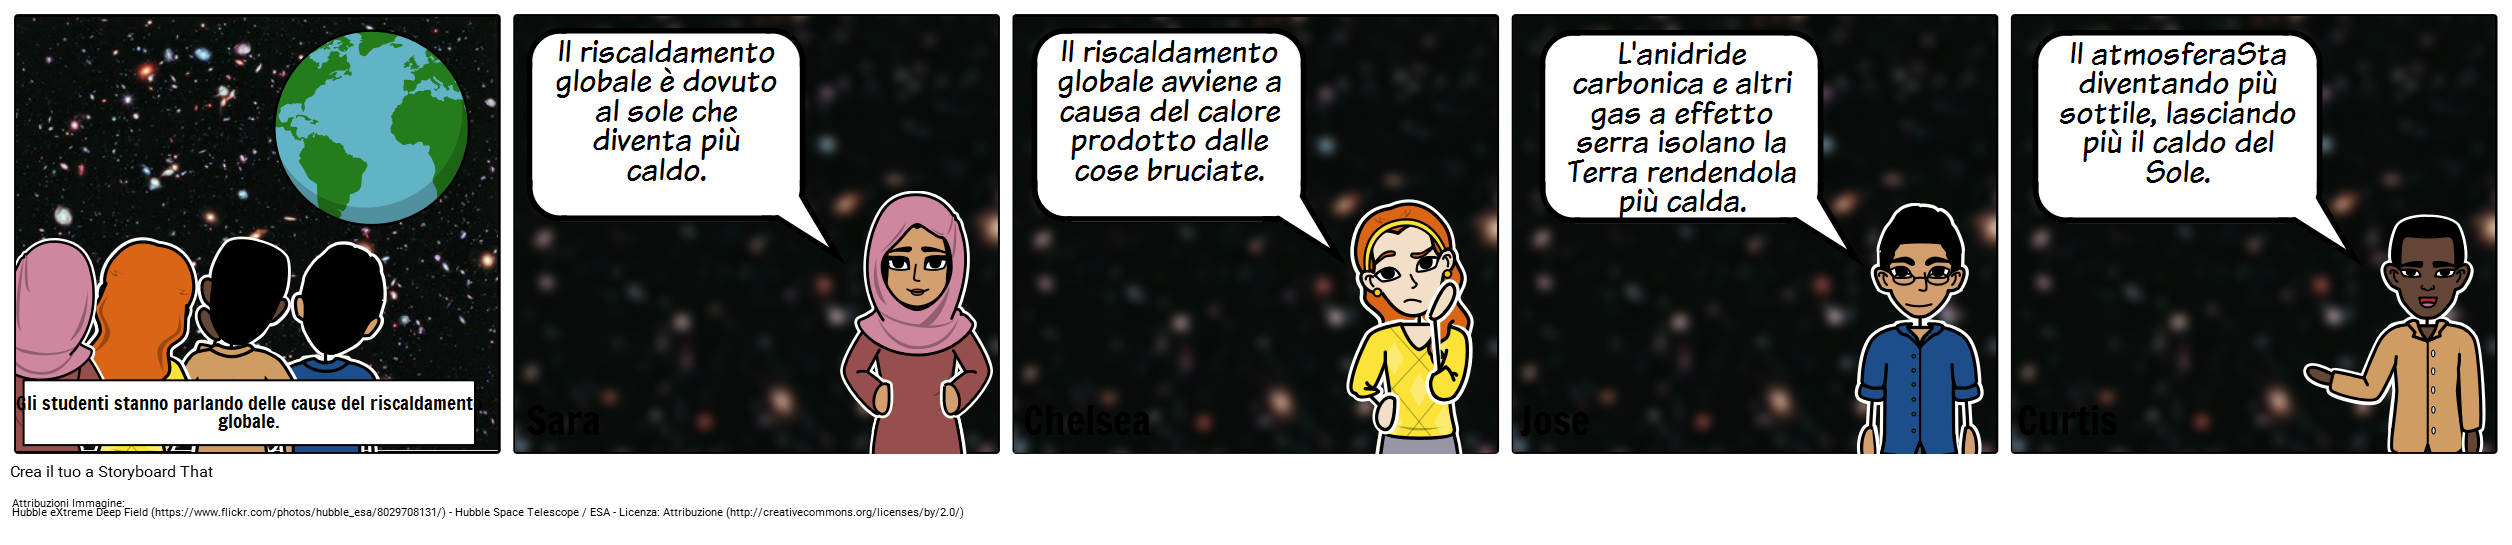 Discussione Storyboard - HS - Riscaldamento Globale